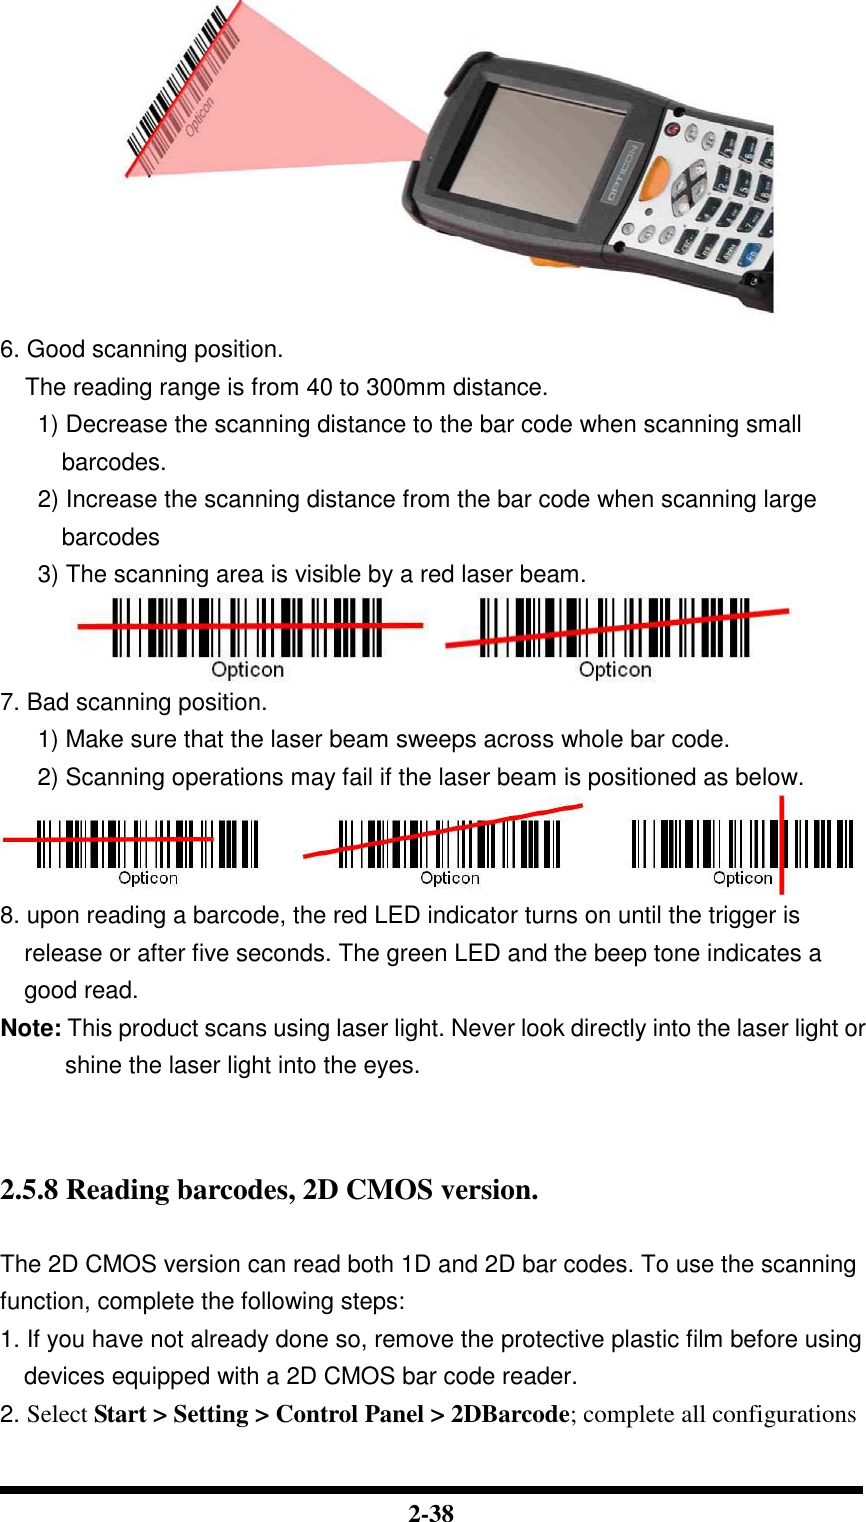  2-38  6. Good scanning position. The reading range is from 40 to 300mm distance. 1) Decrease the scanning distance to the bar code when scanning small barcodes. 2) Increase the scanning distance from the bar code when scanning large barcodes 3) The scanning area is visible by a red laser beam.  7. Bad scanning position. 1) Make sure that the laser beam sweeps across whole bar code. 2) Scanning operations may fail if the laser beam is positioned as below.  8. upon reading a barcode, the red LED indicator turns on until the trigger is release or after five seconds. The green LED and the beep tone indicates a good read. Note: This product scans using laser light. Never look directly into the laser light or shine the laser light into the eyes.    2.5.8 Reading barcodes, 2D CMOS version.  The 2D CMOS version can read both 1D and 2D bar codes. To use the scanning function, complete the following steps: 1. If you have not already done so, remove the protective plastic film before using devices equipped with a 2D CMOS bar code reader. 2. Select Start &gt; Setting &gt; Control Panel &gt; 2DBarcode; complete all configurations 